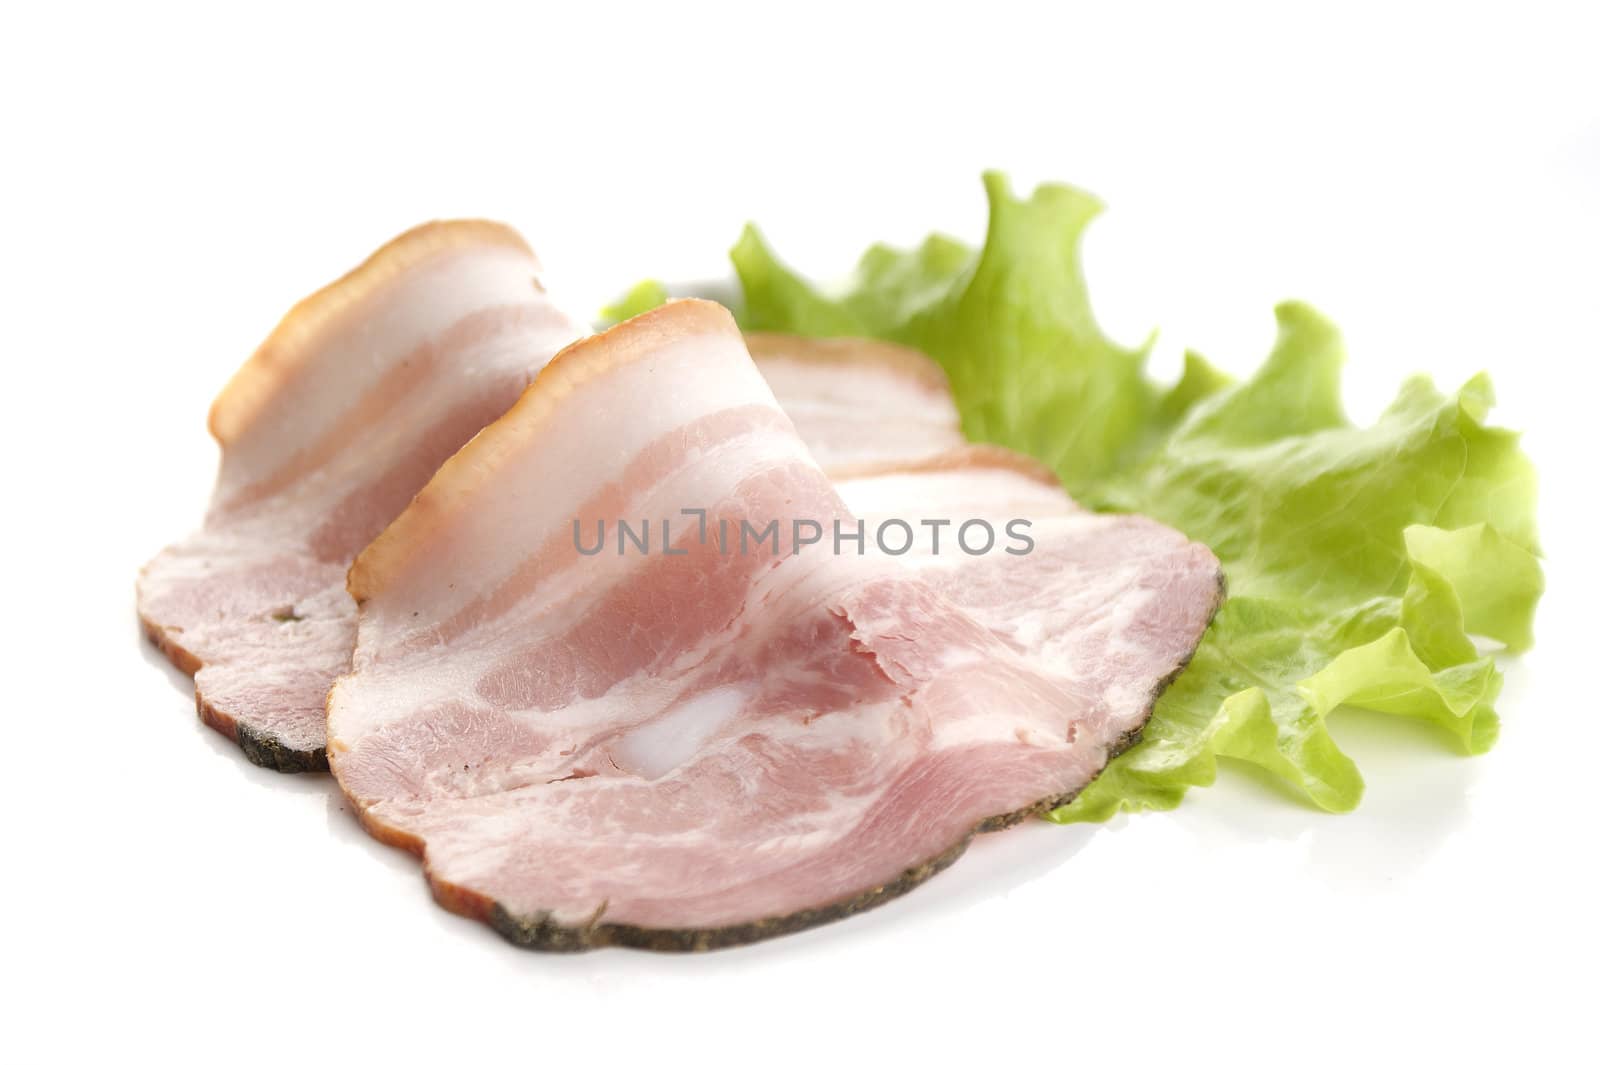 Two pieces of bacon on the fresh lettuce